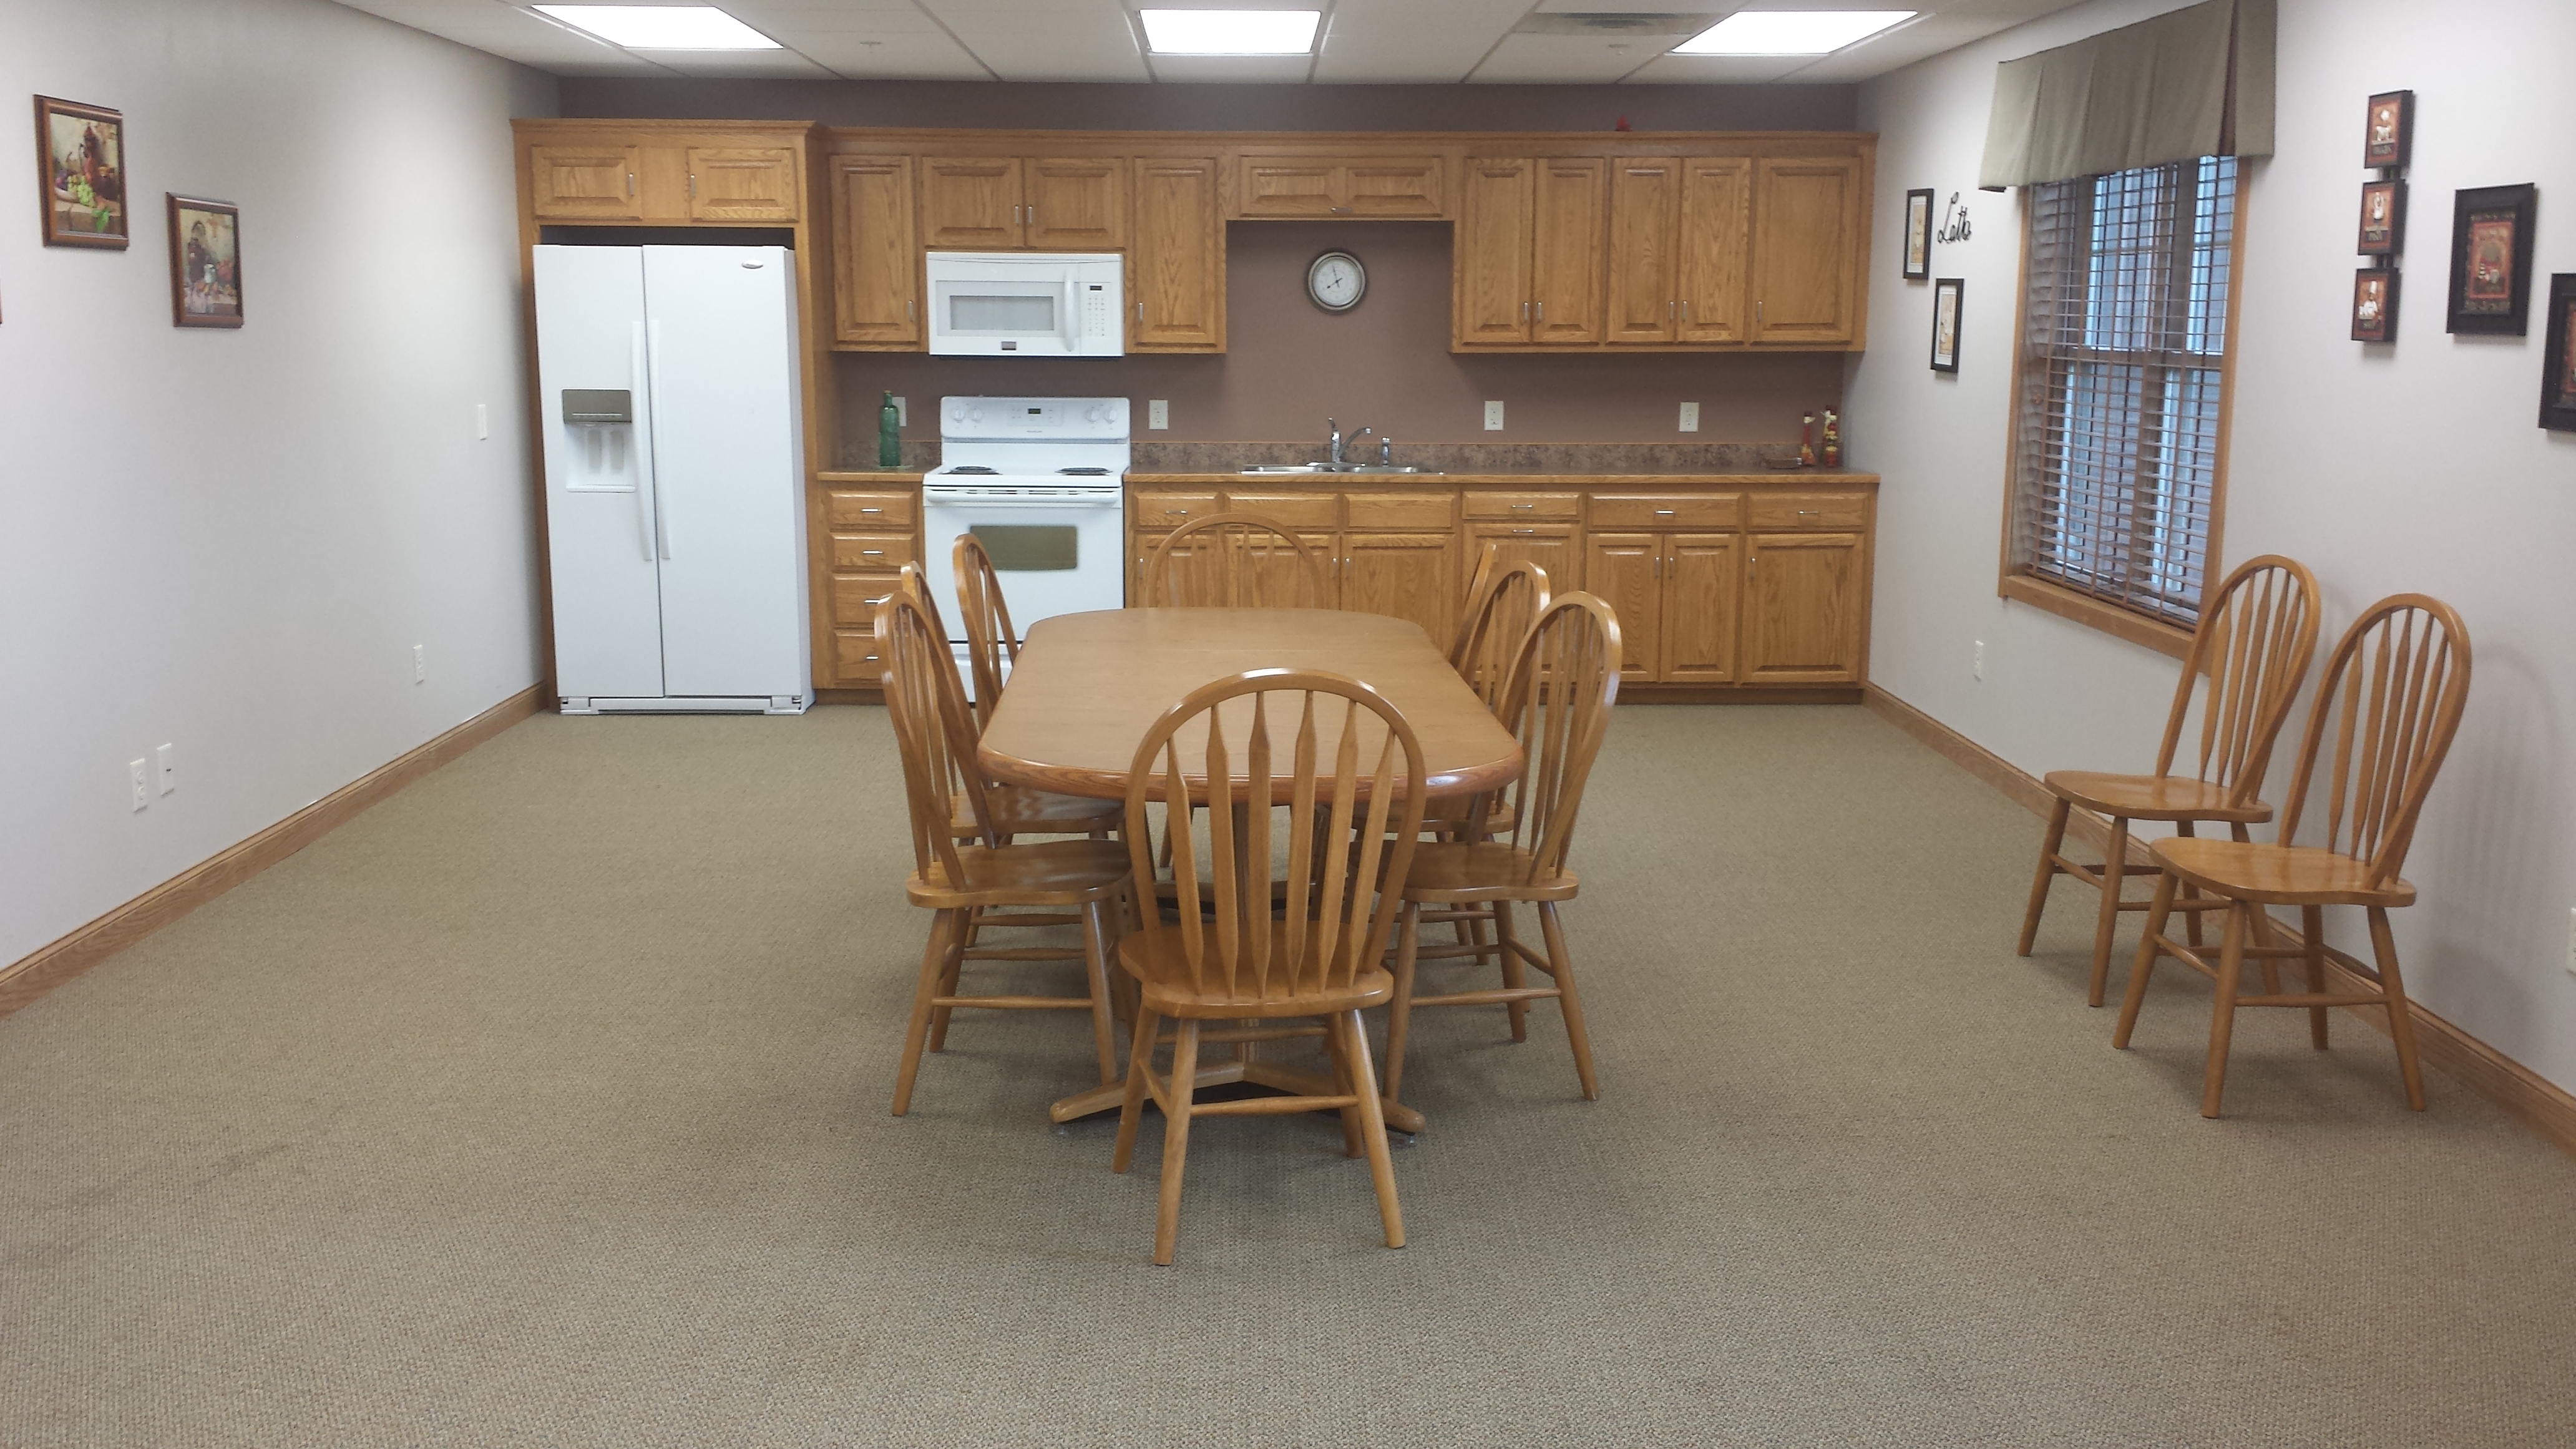 Kitchen at Lakeview Assisted Living